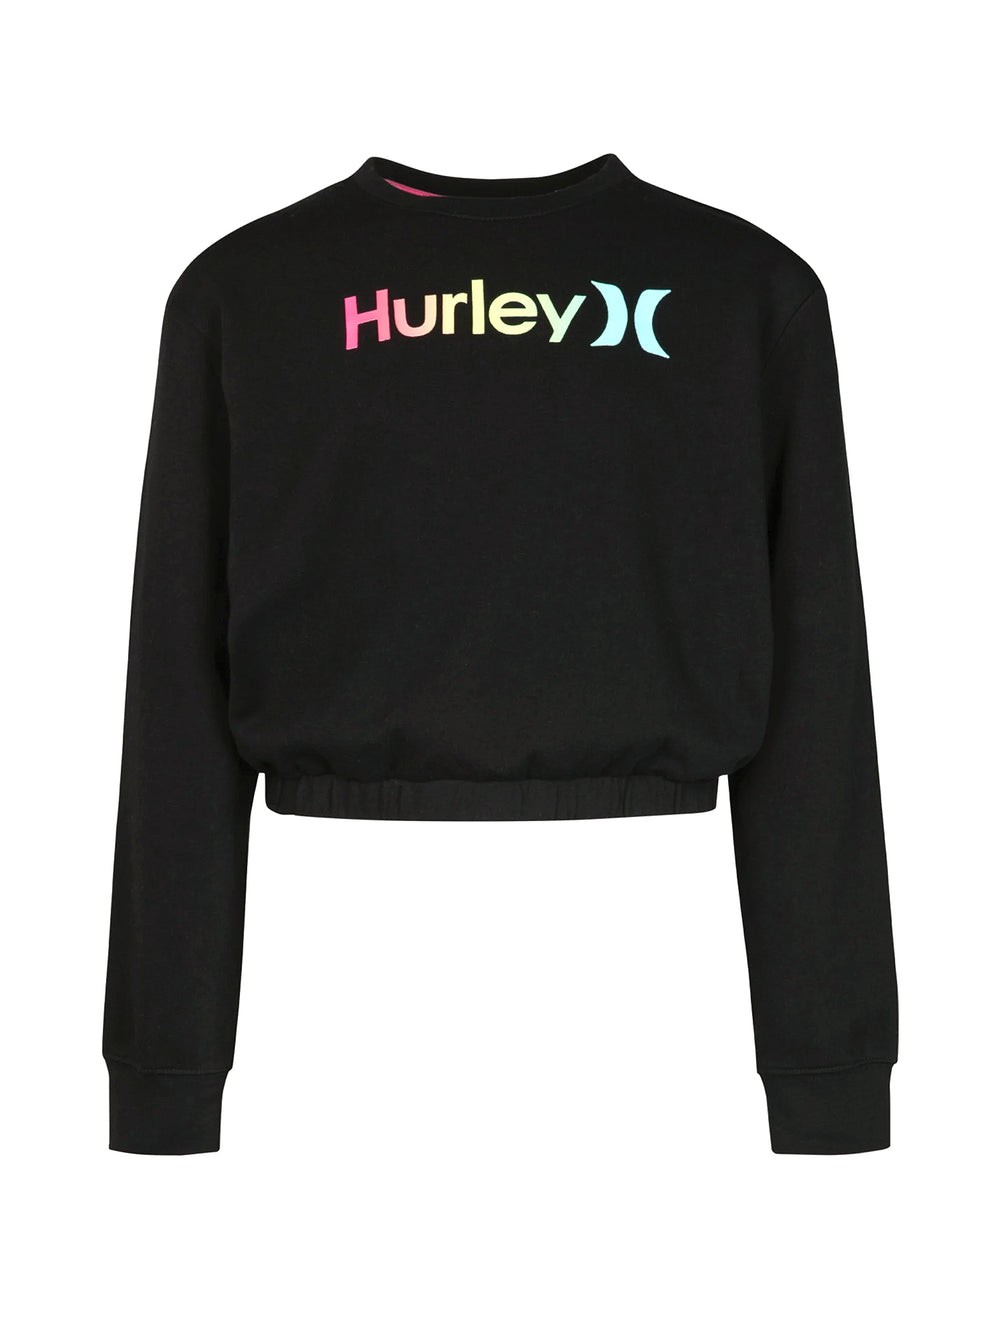 KIDS HURLEY FRENCH TERRY CREWNECK